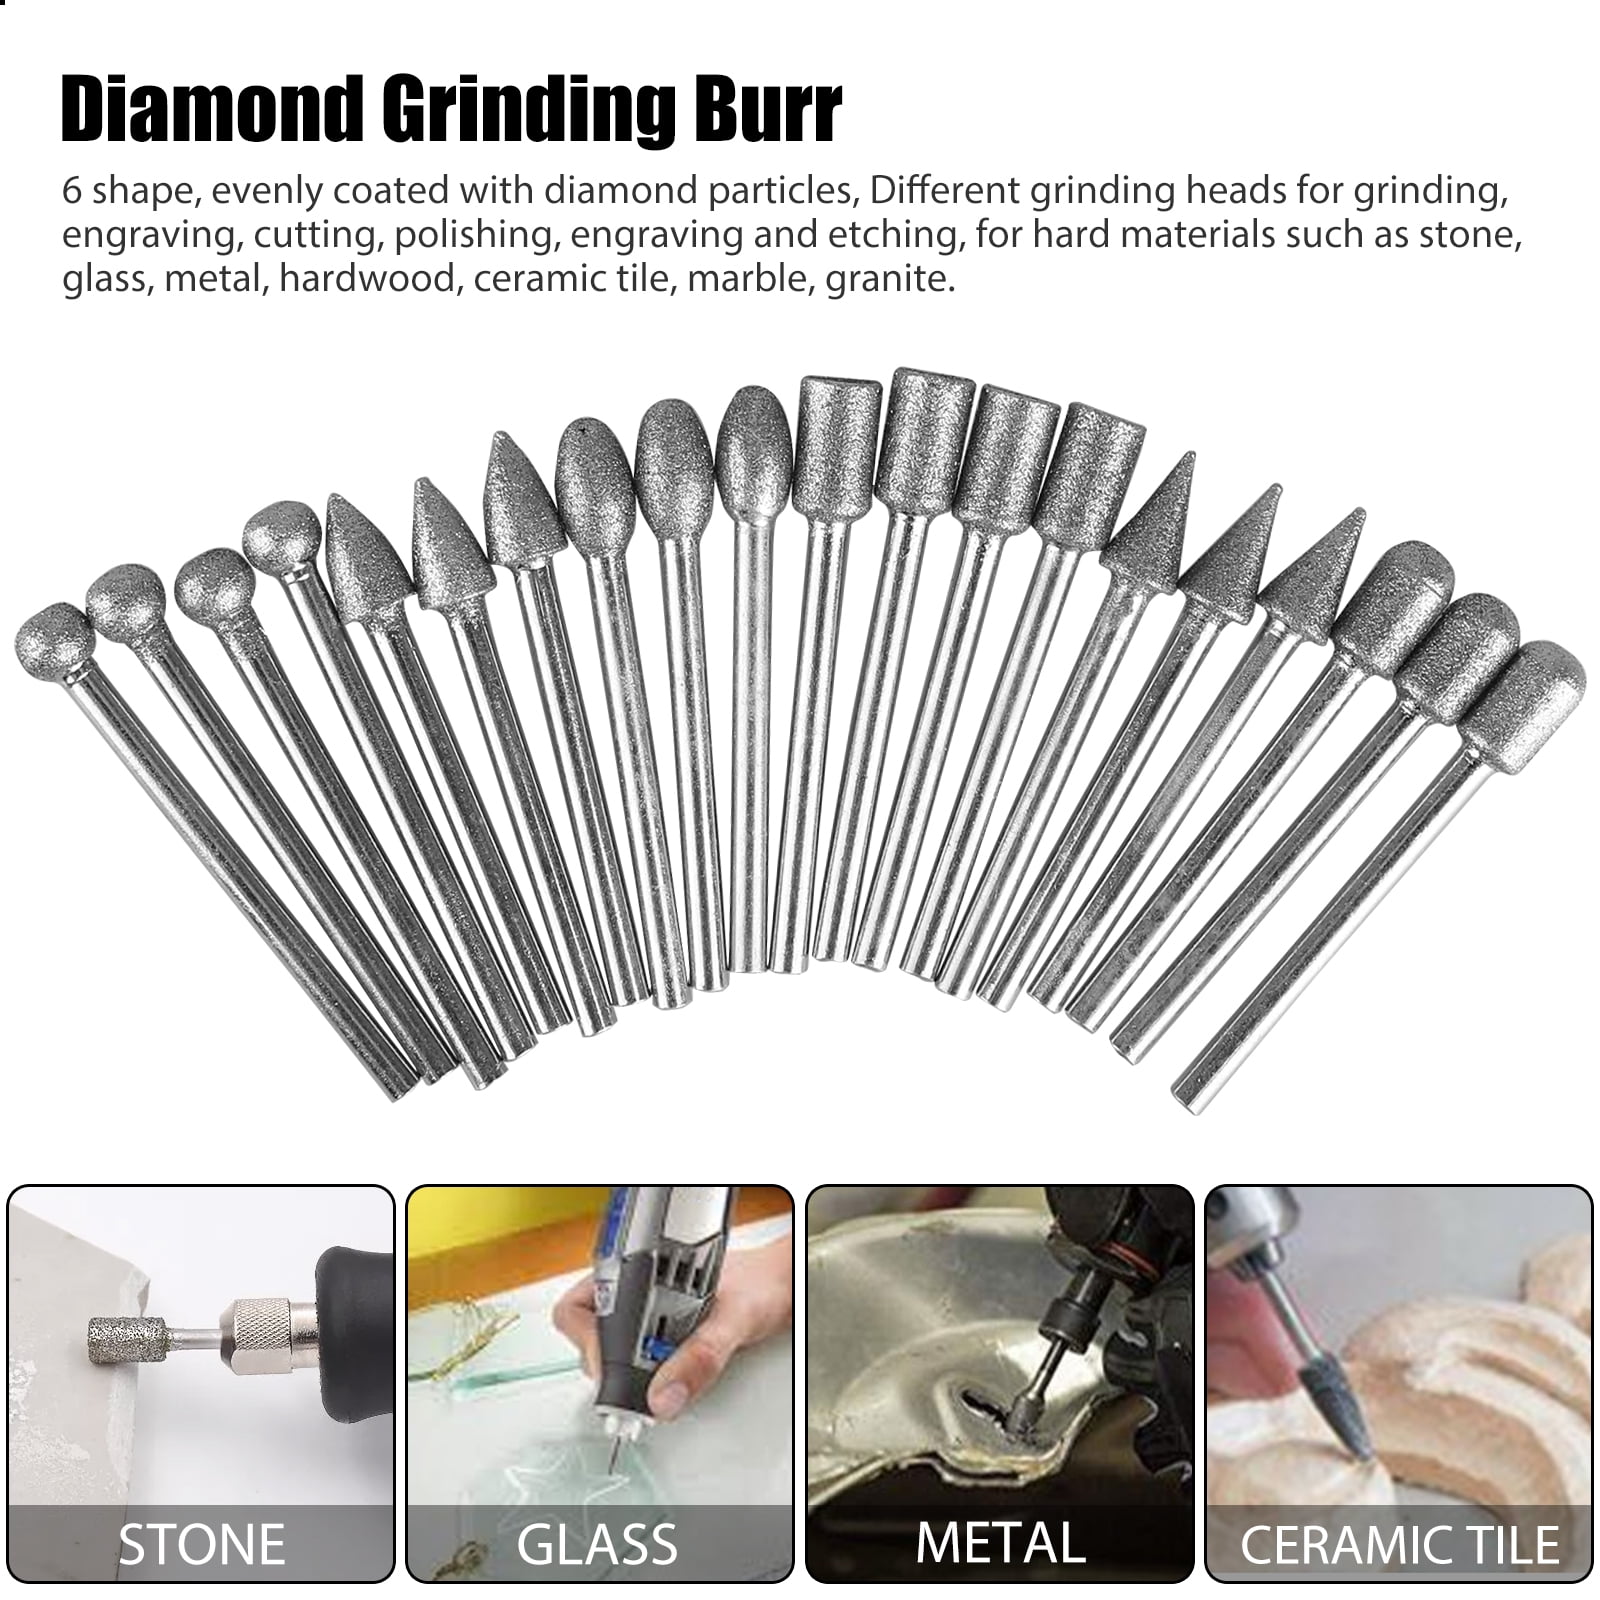 Rocks Jewelry Ceramics For Dremel Rotary Tools Glass 43 Pieces Stone Carving Set Polishing Rotary Tools Diamond Burr Accessories for Carving/Engraving Stone